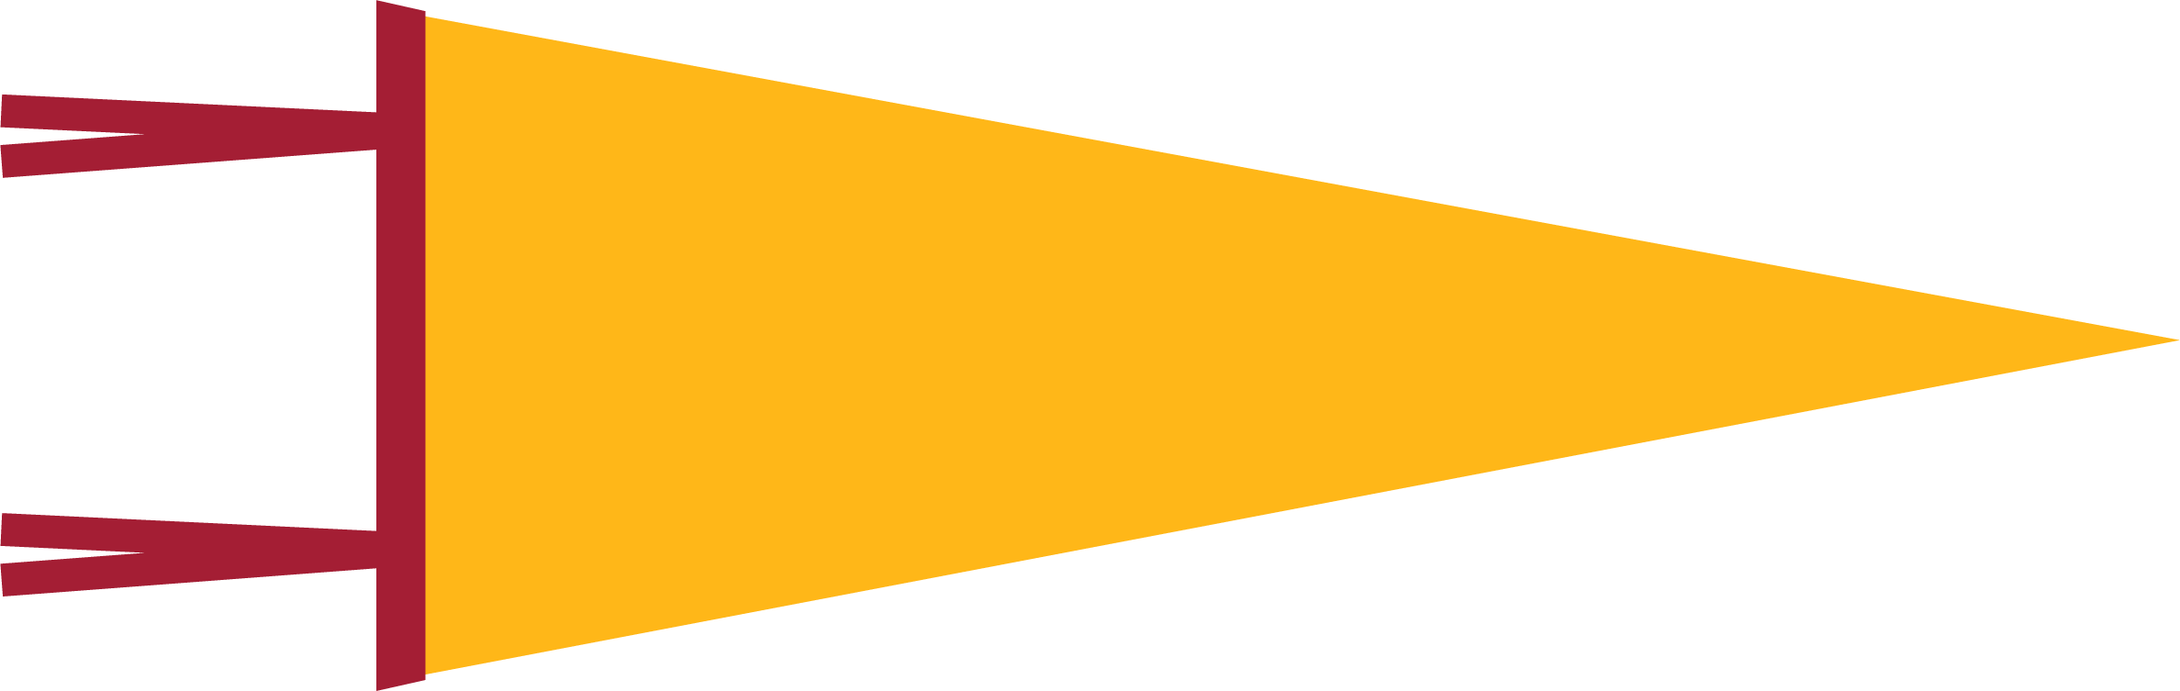 Gold / Red  Blank Pennant Flag